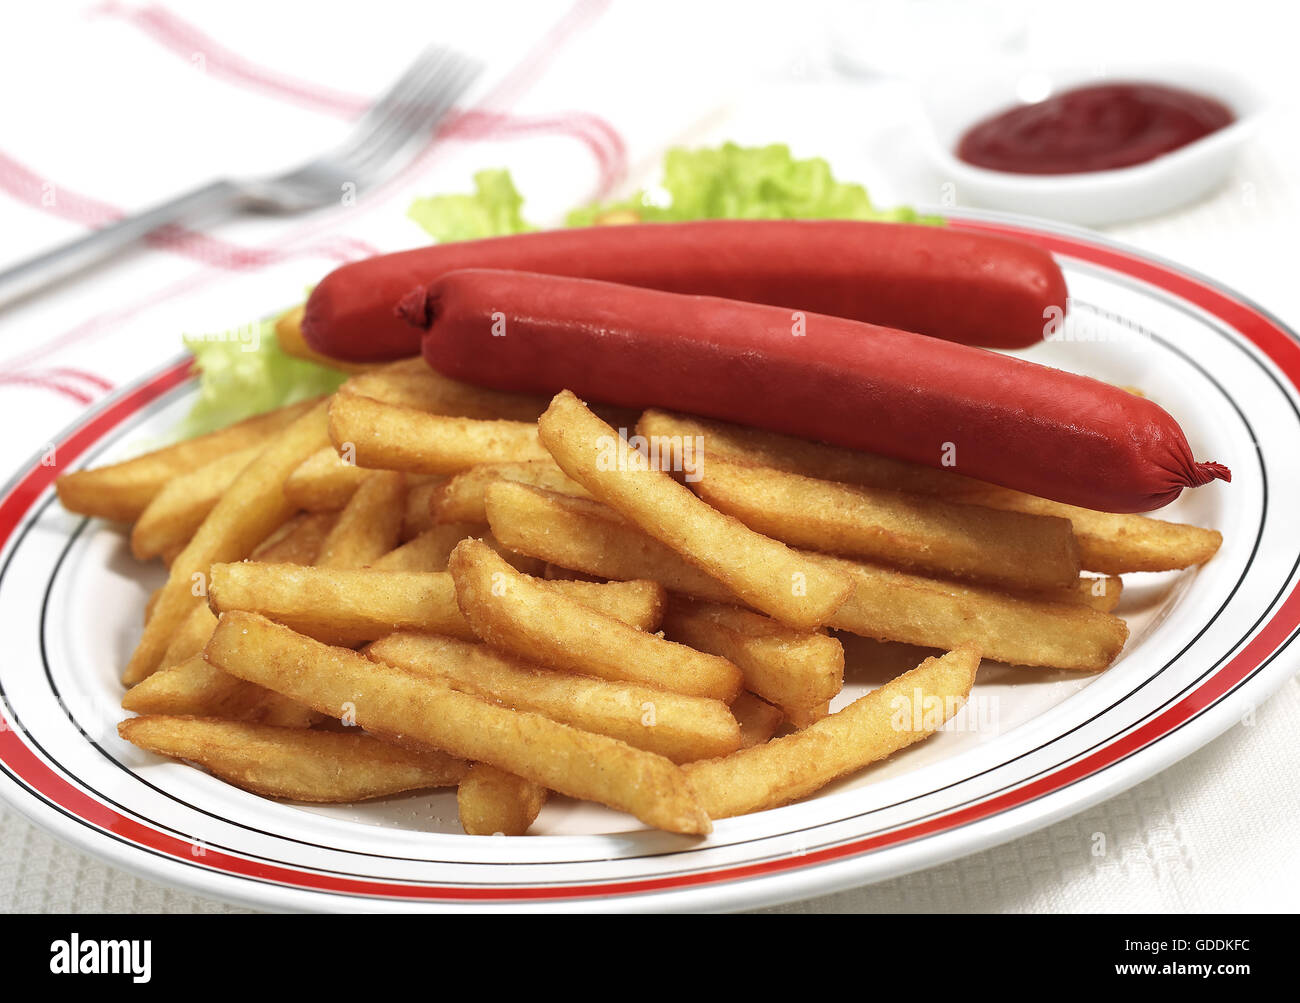 PLATE WITH SAUSAGES, FRENCH FRIES AND SALAD Stock Photo